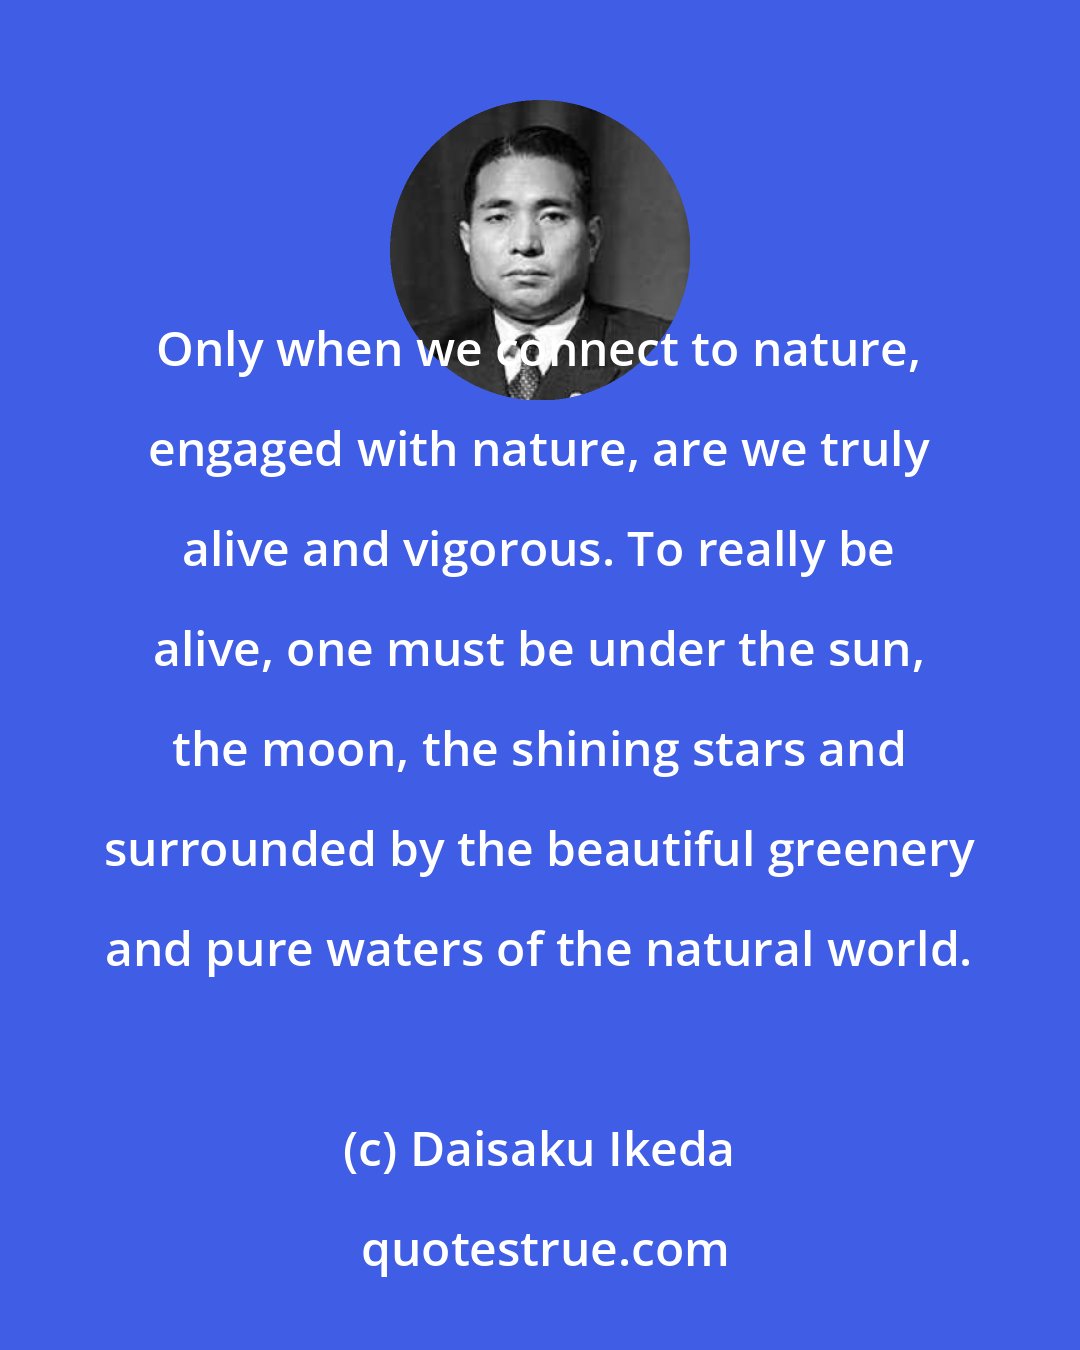 Daisaku Ikeda: Only when we connect to nature, engaged with nature, are we truly alive and vigorous. To really be alive, one must be under the sun, the moon, the shining stars and surrounded by the beautiful greenery and pure waters of the natural world.